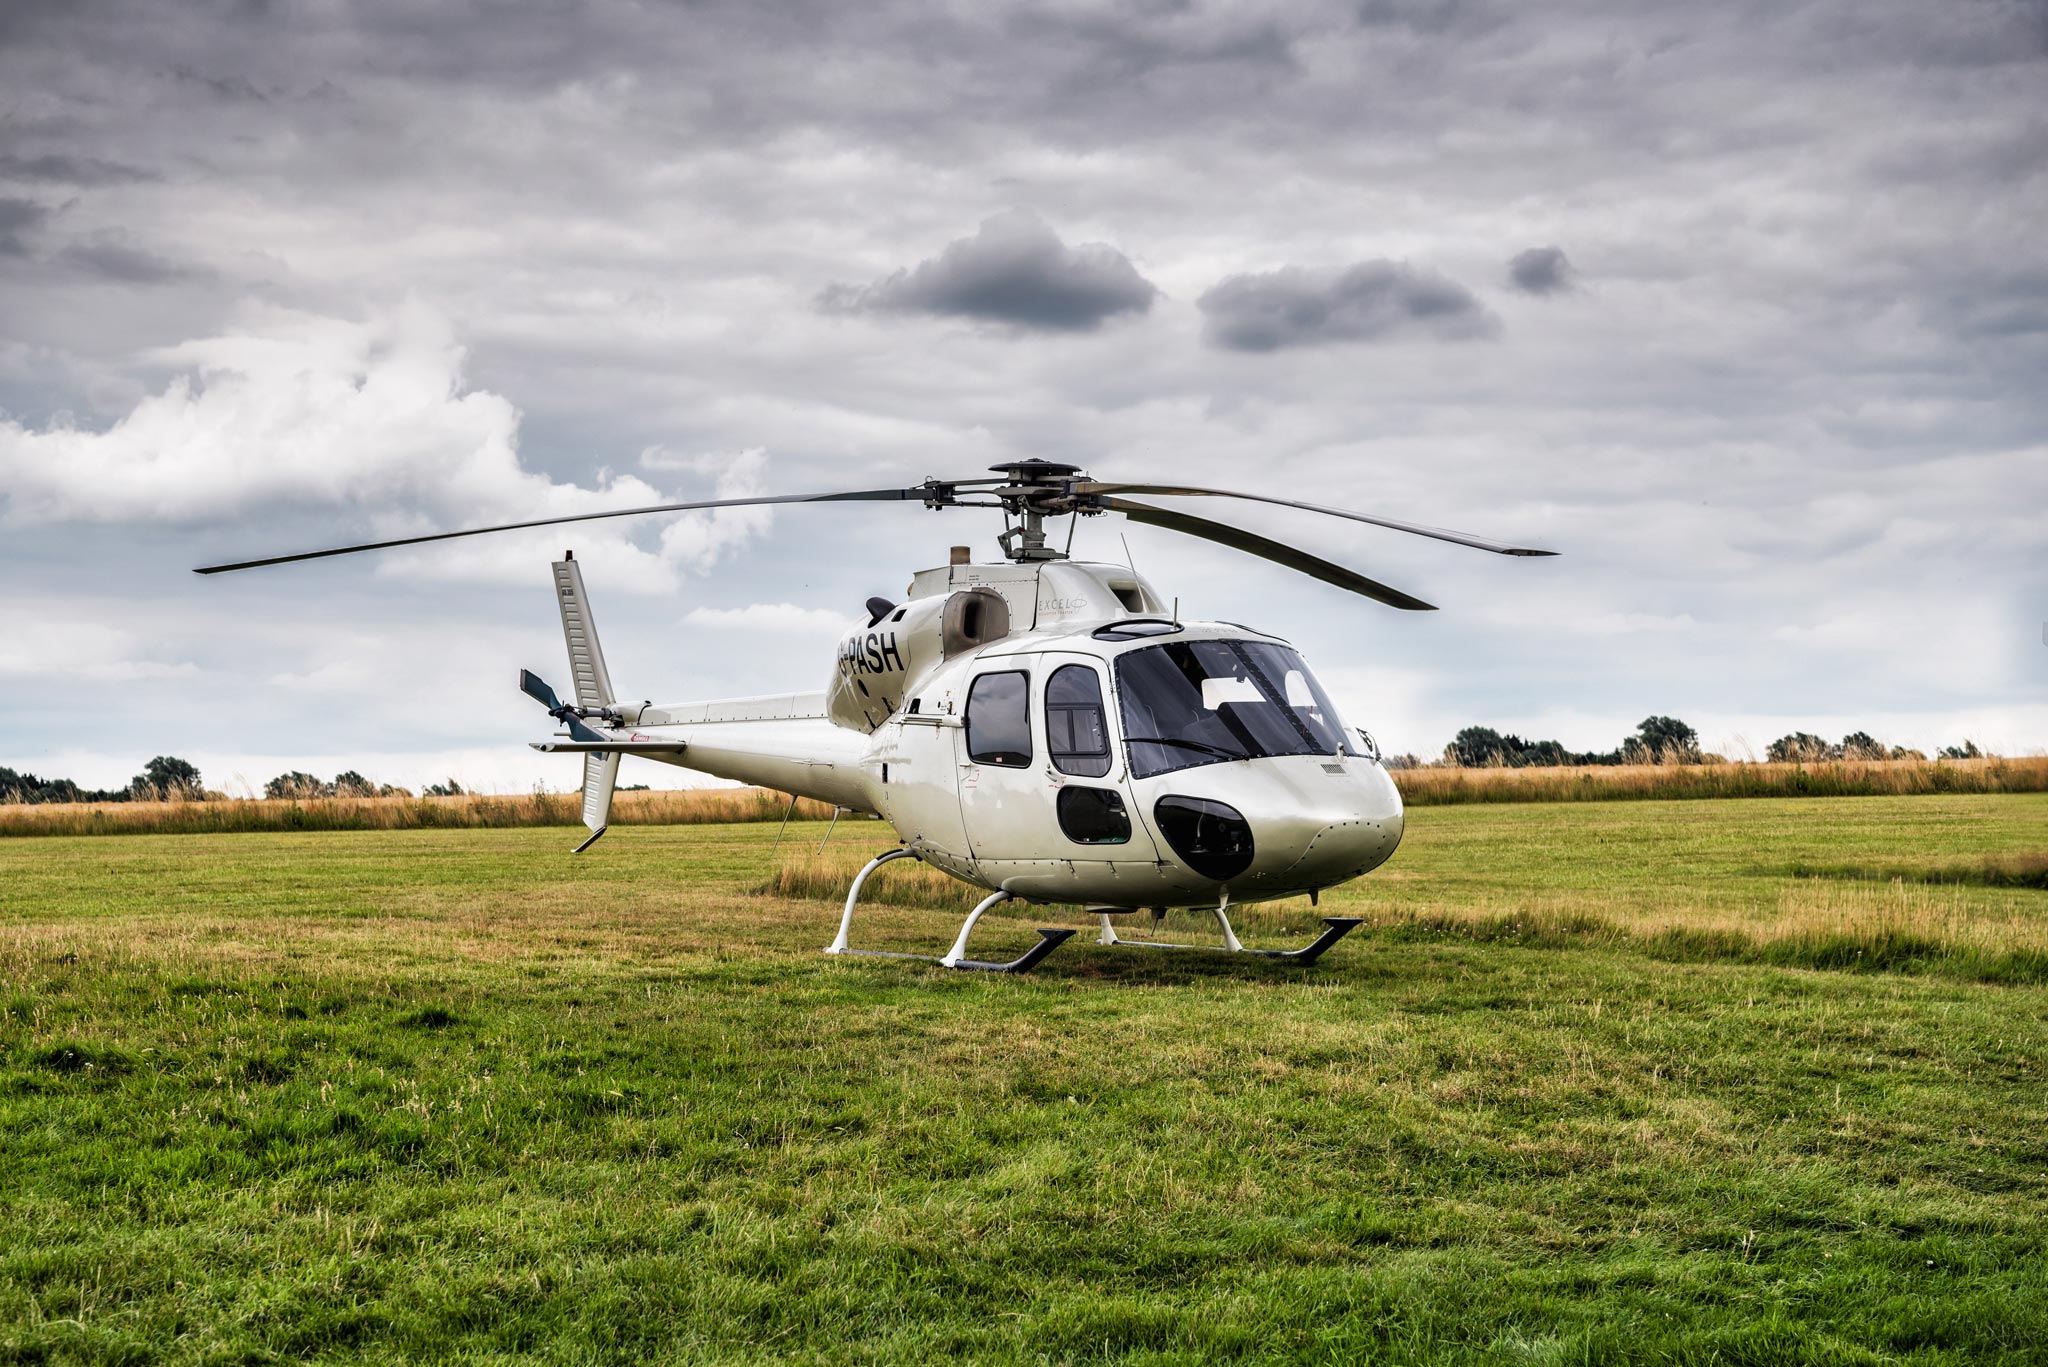 An aerial adventure captured by Wright Content, featuring a helicopter standing in a field on the outskirts of London. This image represents the start of an epic aerial photography journey over the city of London. Wright Content specializes in capturing stunning aerial perspectives of urban landscapes.